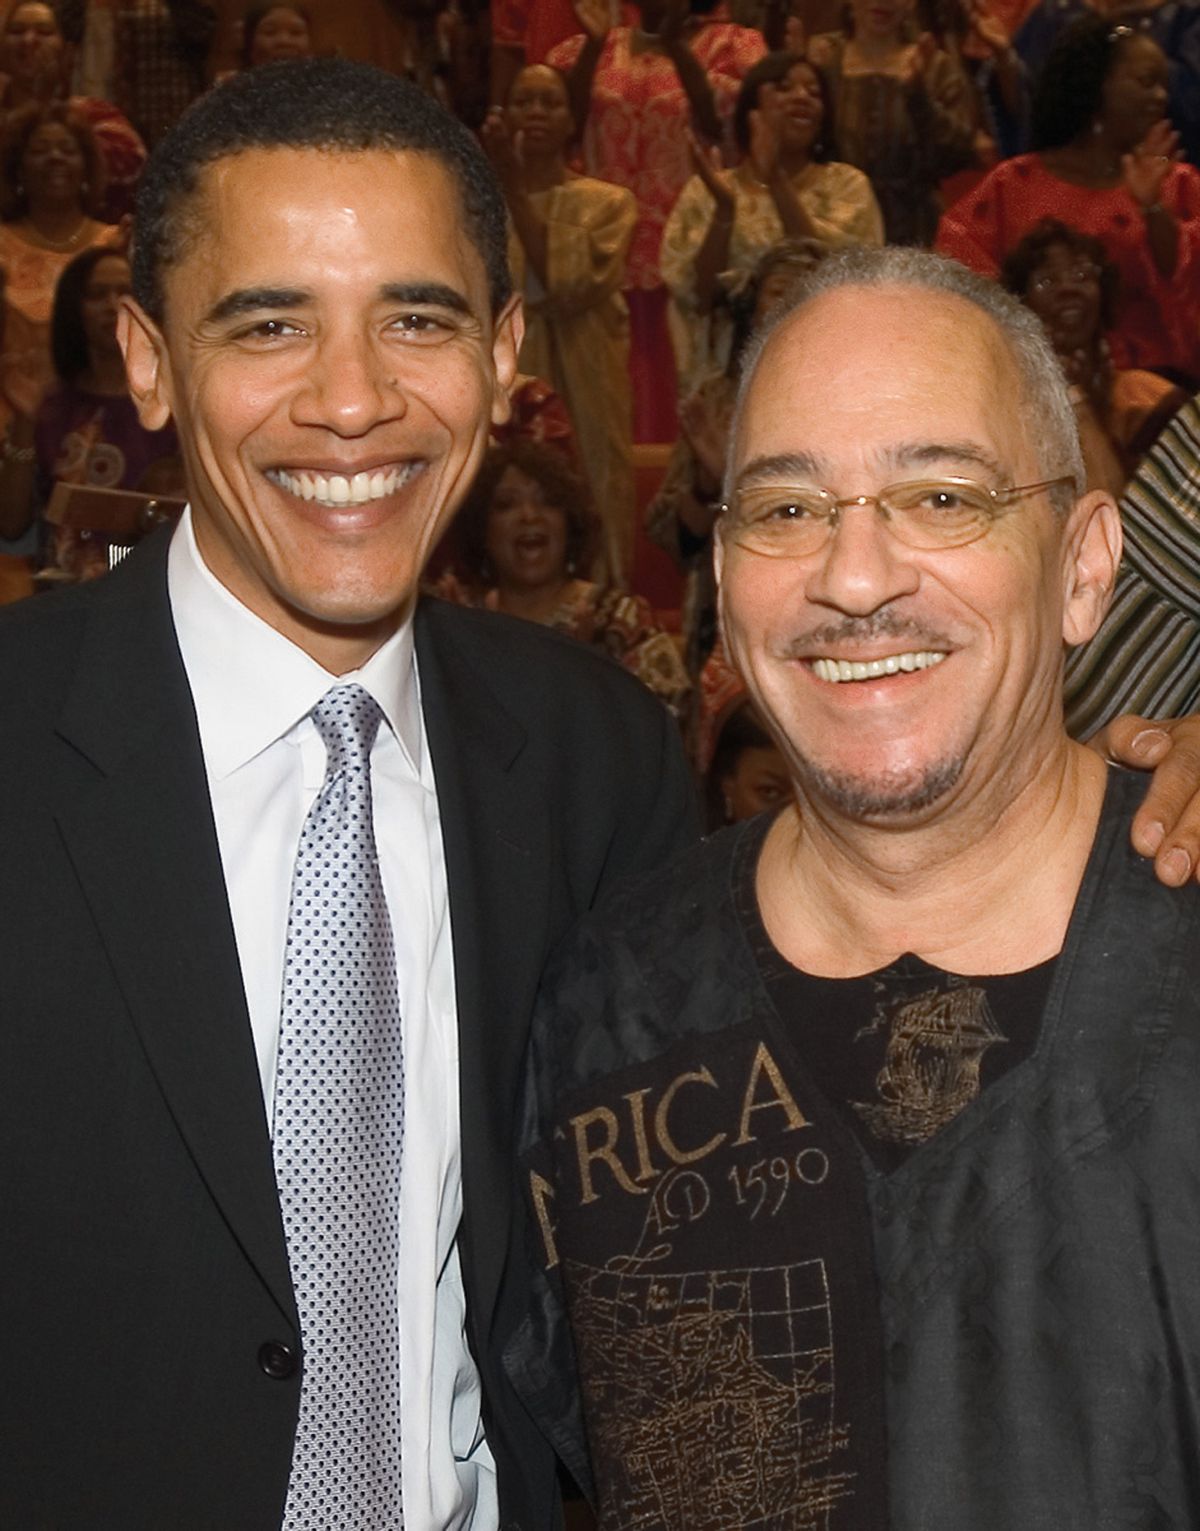 **  FILE ** In this undated photo from Trinity United Church of Christ, Democratic presidential candidate Sen. Barack Obama, D-Ill., left, poses with the church's pastor, Rev. Jeremiah Wright in Chicago.  John McCain and Barack Obama, both seeking to use religion to their advantage in their presidential campaigns, have learned painful lessons about the risks of getting too close to religious leaders. Both failed to realize that sermons that get a narrow audience on Sundays don't play as well on the national stage.   (AP Photo/Trinity United Church of Christ, File) (Associated Press)